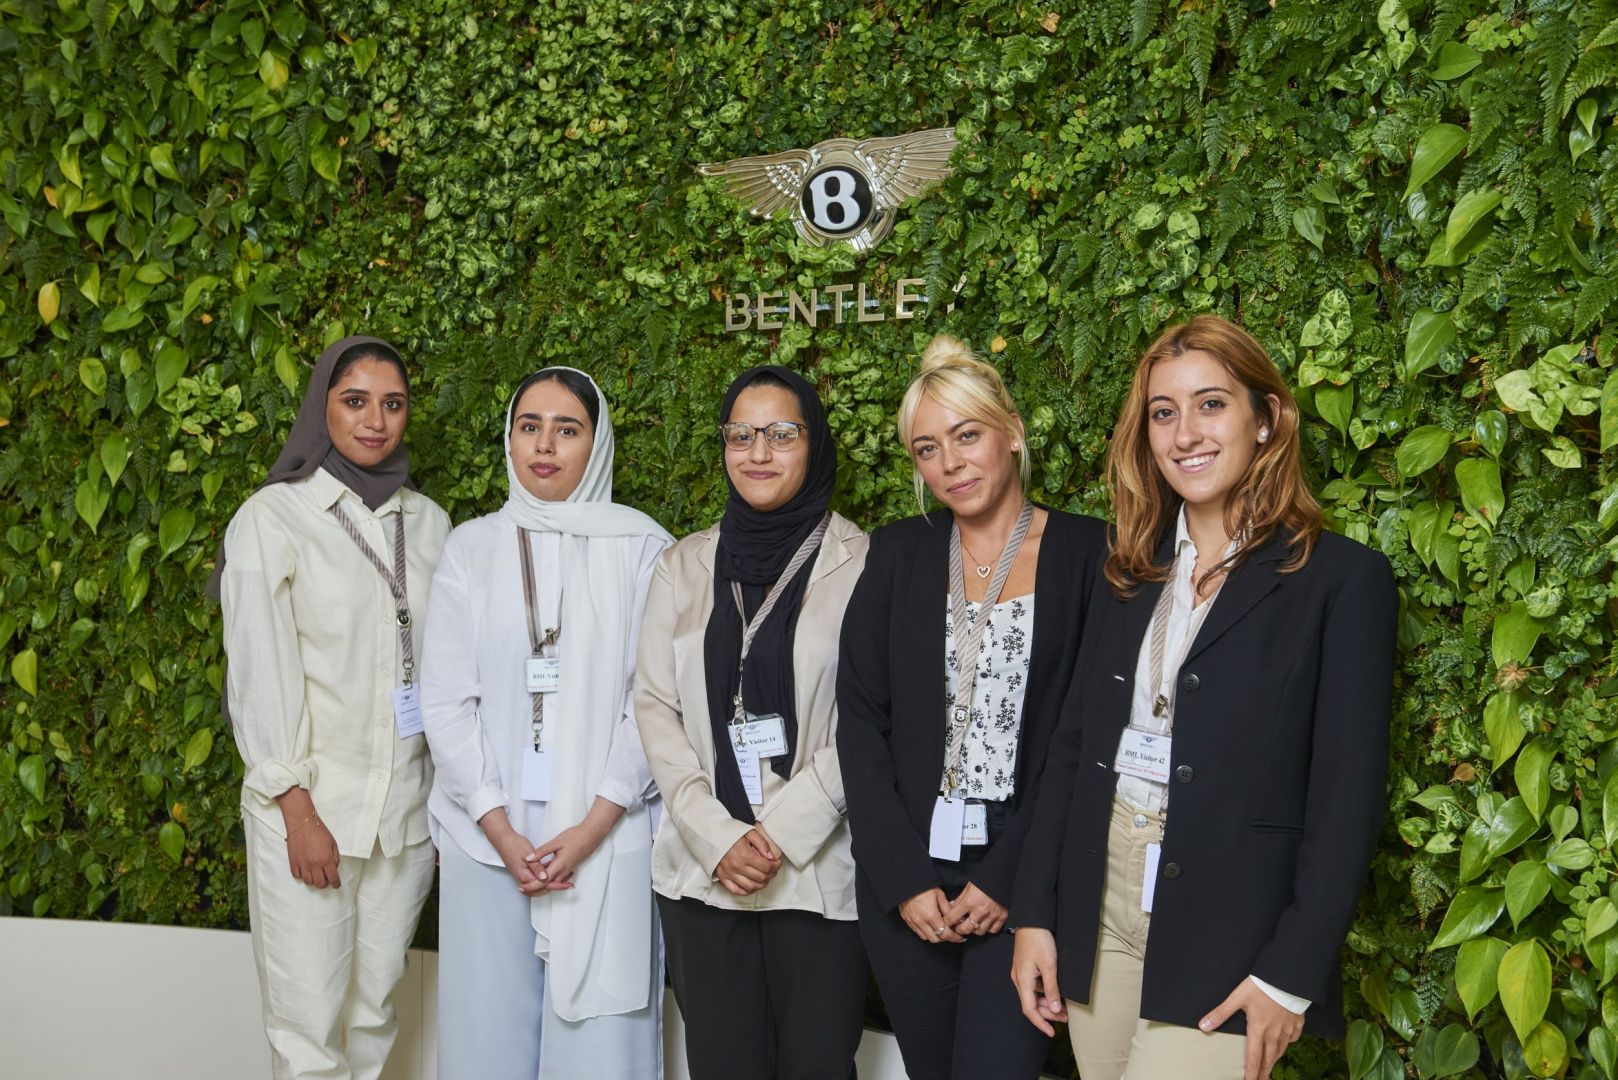 Bentley has successfully completed the first phase of the women’s mentoring program on PortalAutomotriz.com